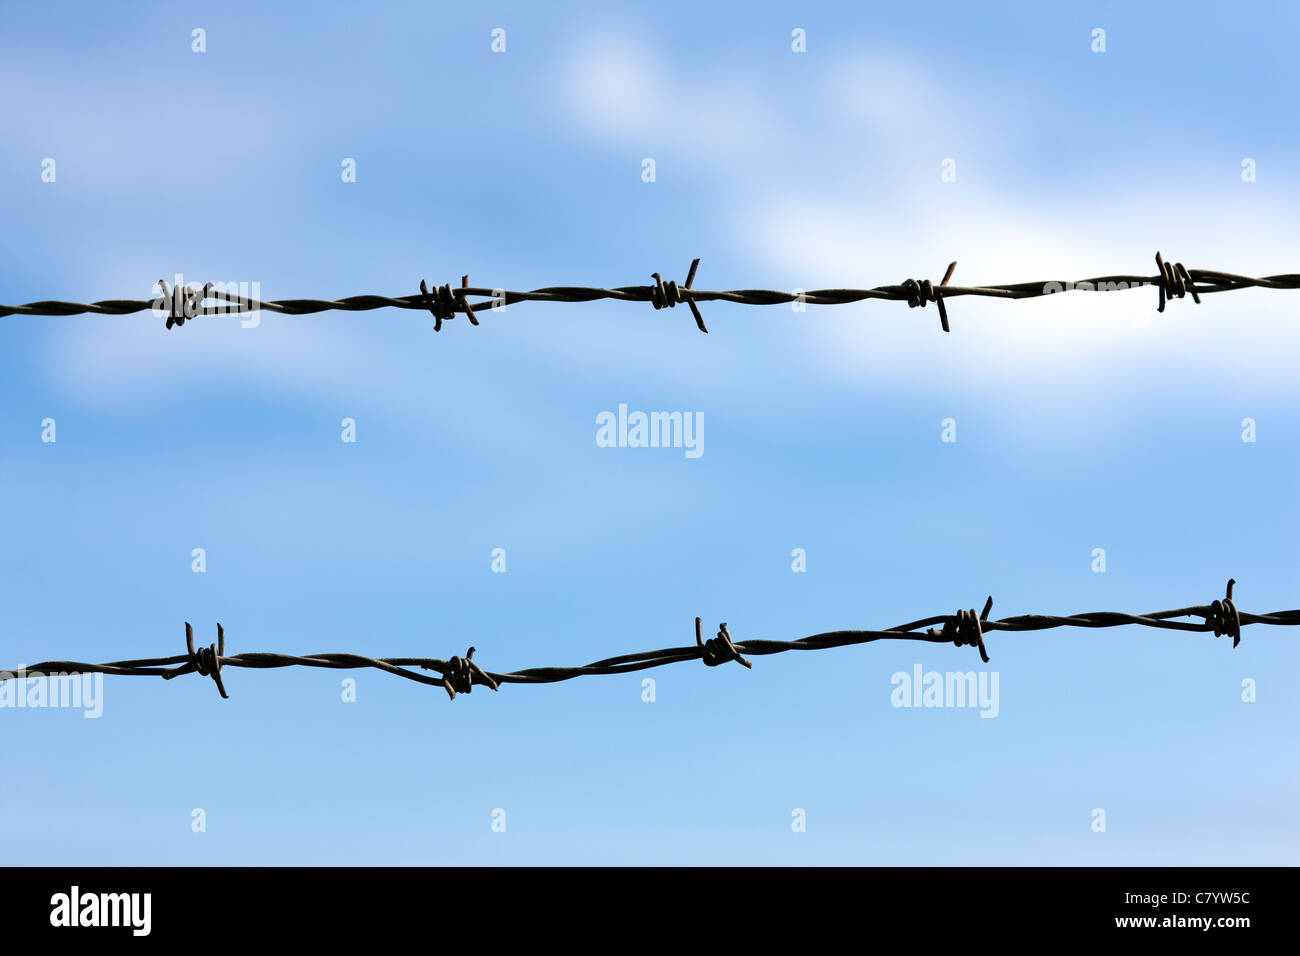 Two strands of barbed wire against a blue sky Stock Photo